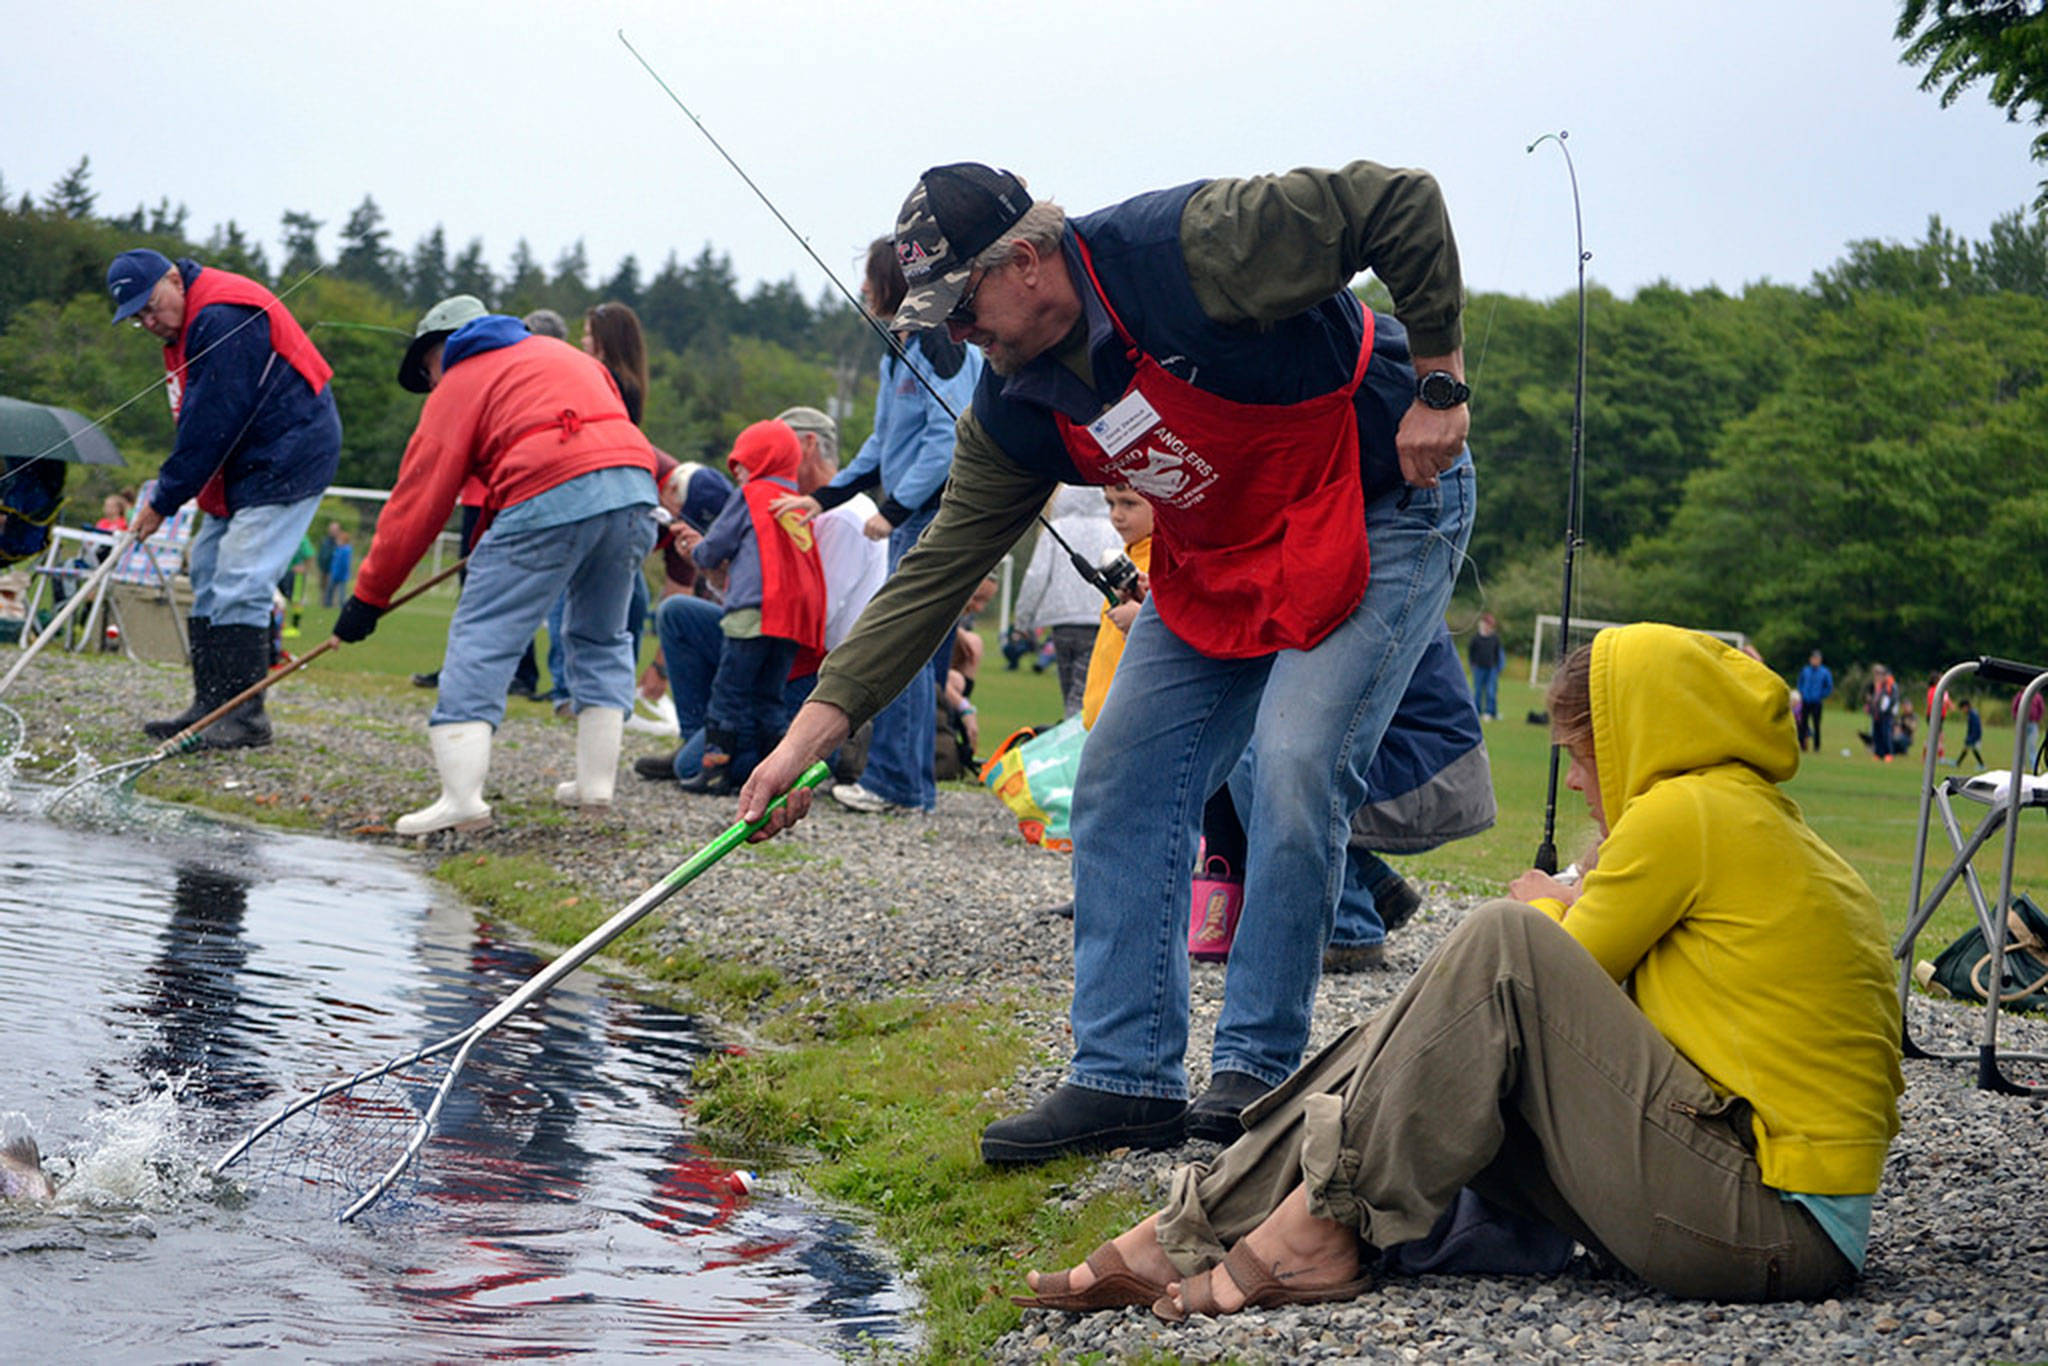 Jamie and Gibson Hill of Sequim pull in a fish while Dave Dewald tries to net it at Kids Fishing Day in 2016. Organizers of the event plan to hold it May 19, 2018, but they hope to move the event to another pond in 2019 to preserve the fish in hot weather. (Matthew Nash/Olympic Peninsula News Group)